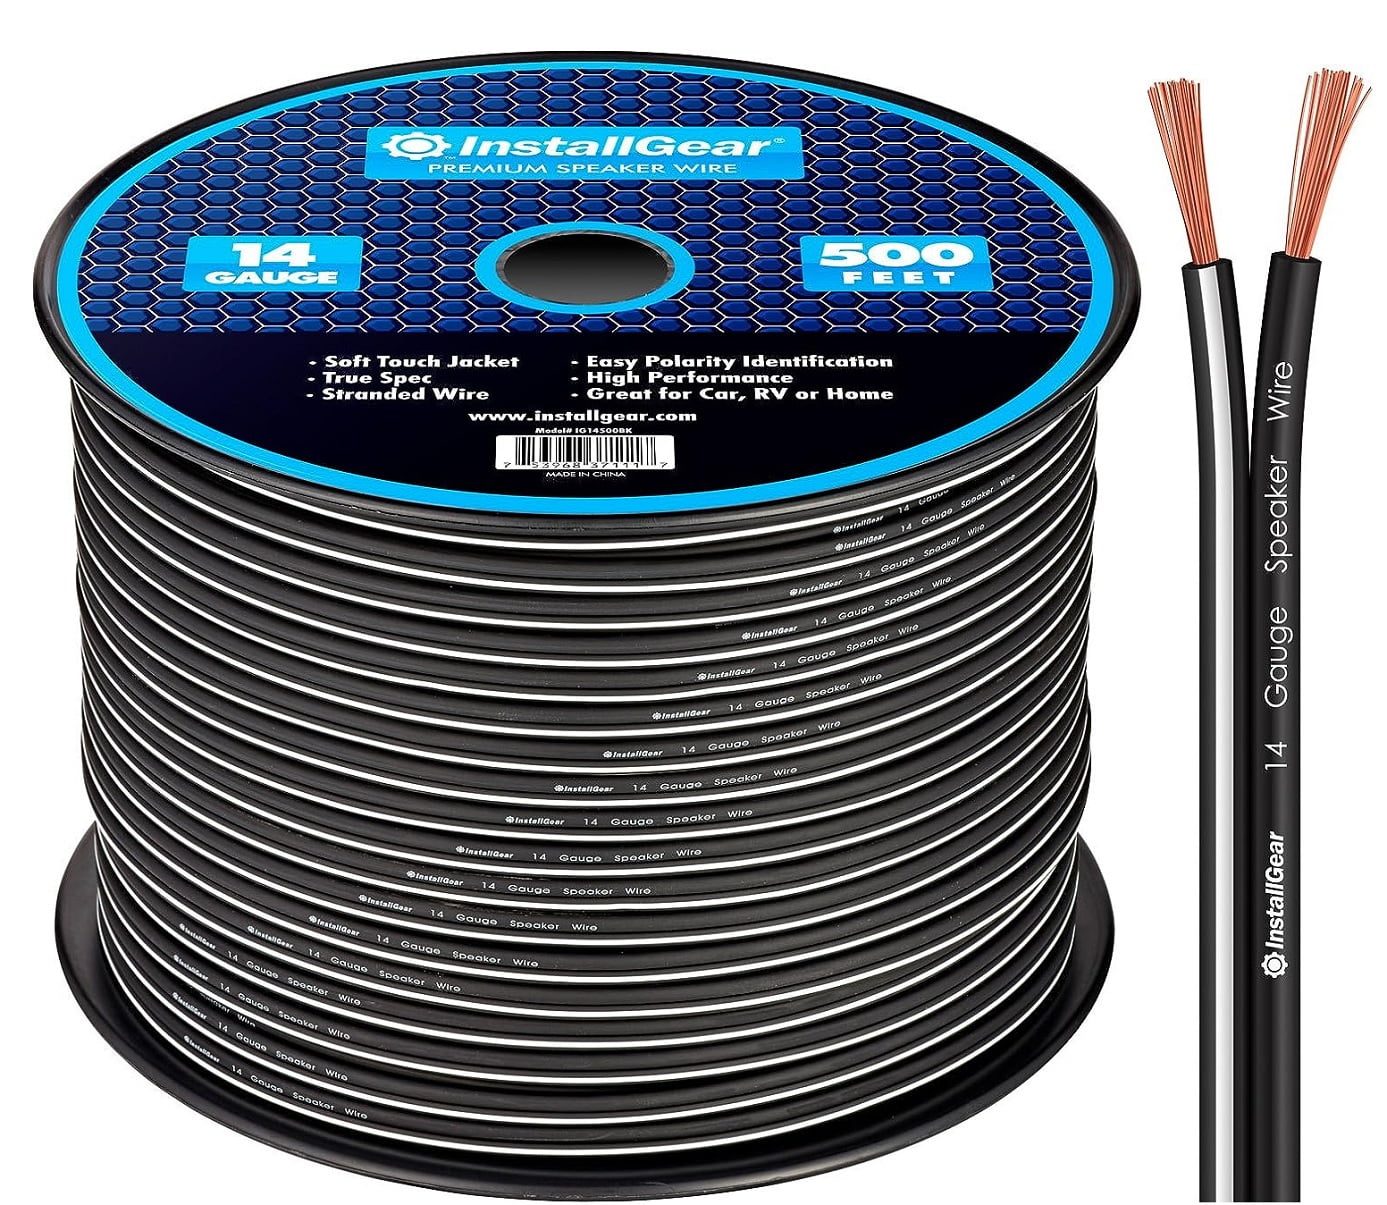 GearIT 10 Gauge Speaker Wire (100 Feet), Copper Clad Aluminum, CCA Thick Gauge  Copper Wire for Stereo, Surround Sound, Home Theater, Radio (Black/Blue,  100 Feet) 